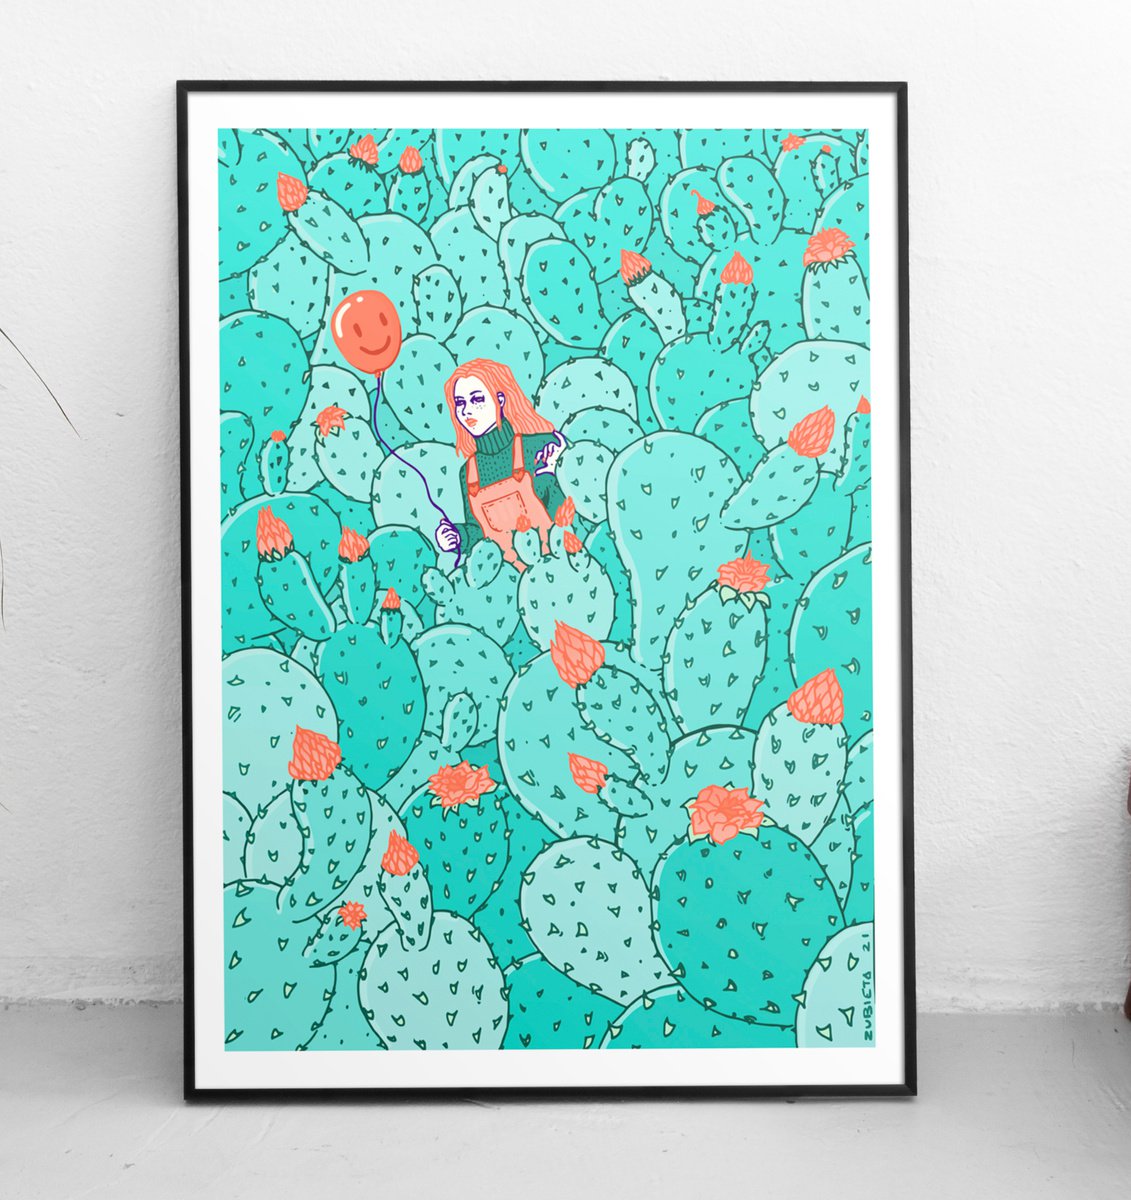 Prickly Games | The Cactus Maze | Limited edition of 50 A3 Size by Marta Zubieta